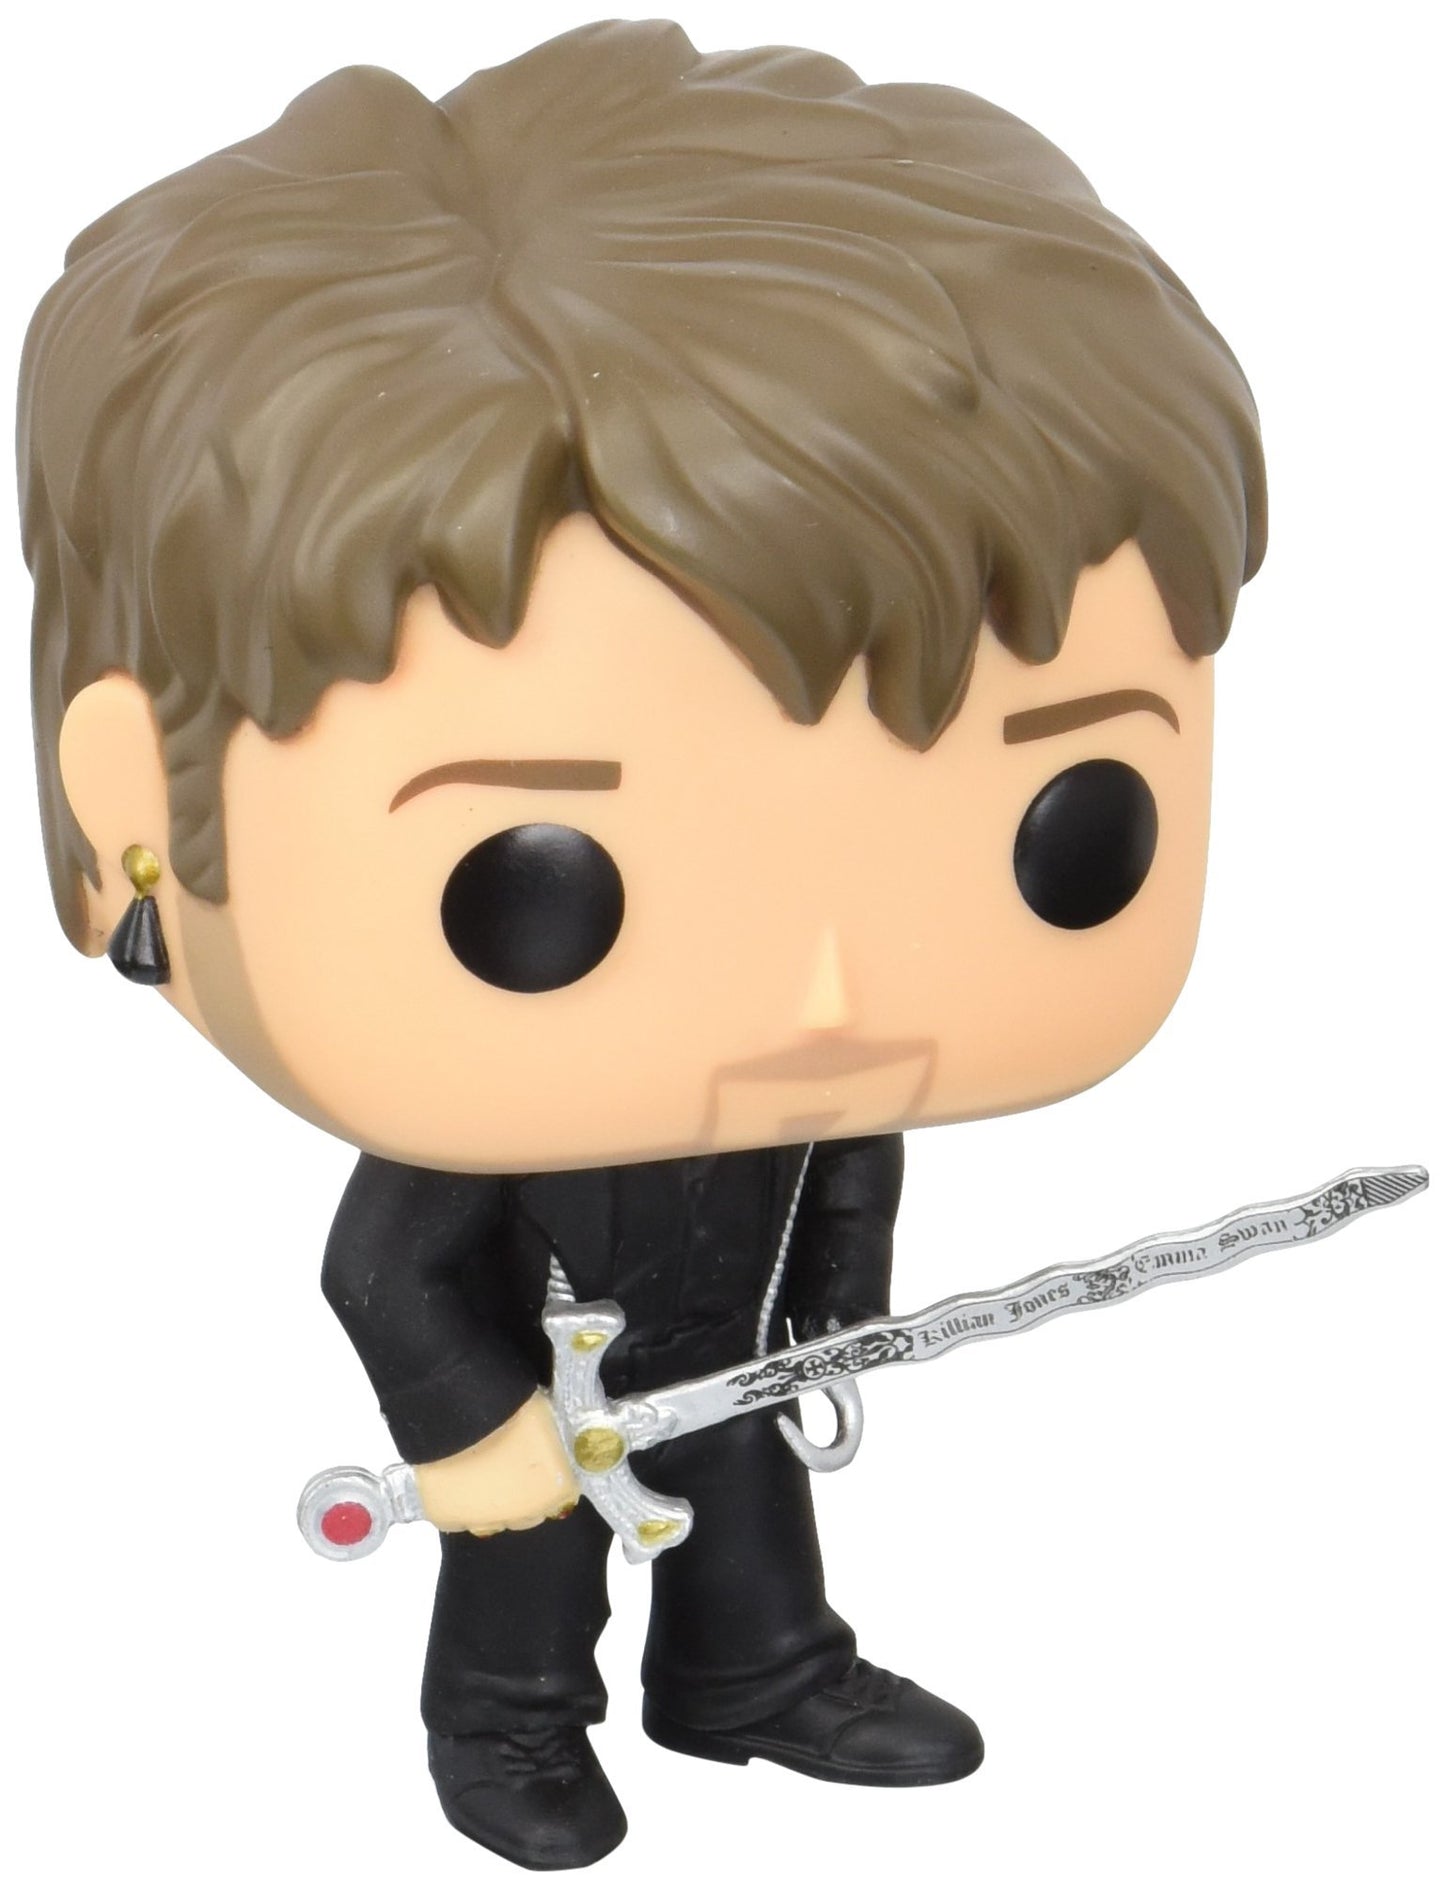 Funko POP! Television: Once Upon a Time Hook with Excalibur